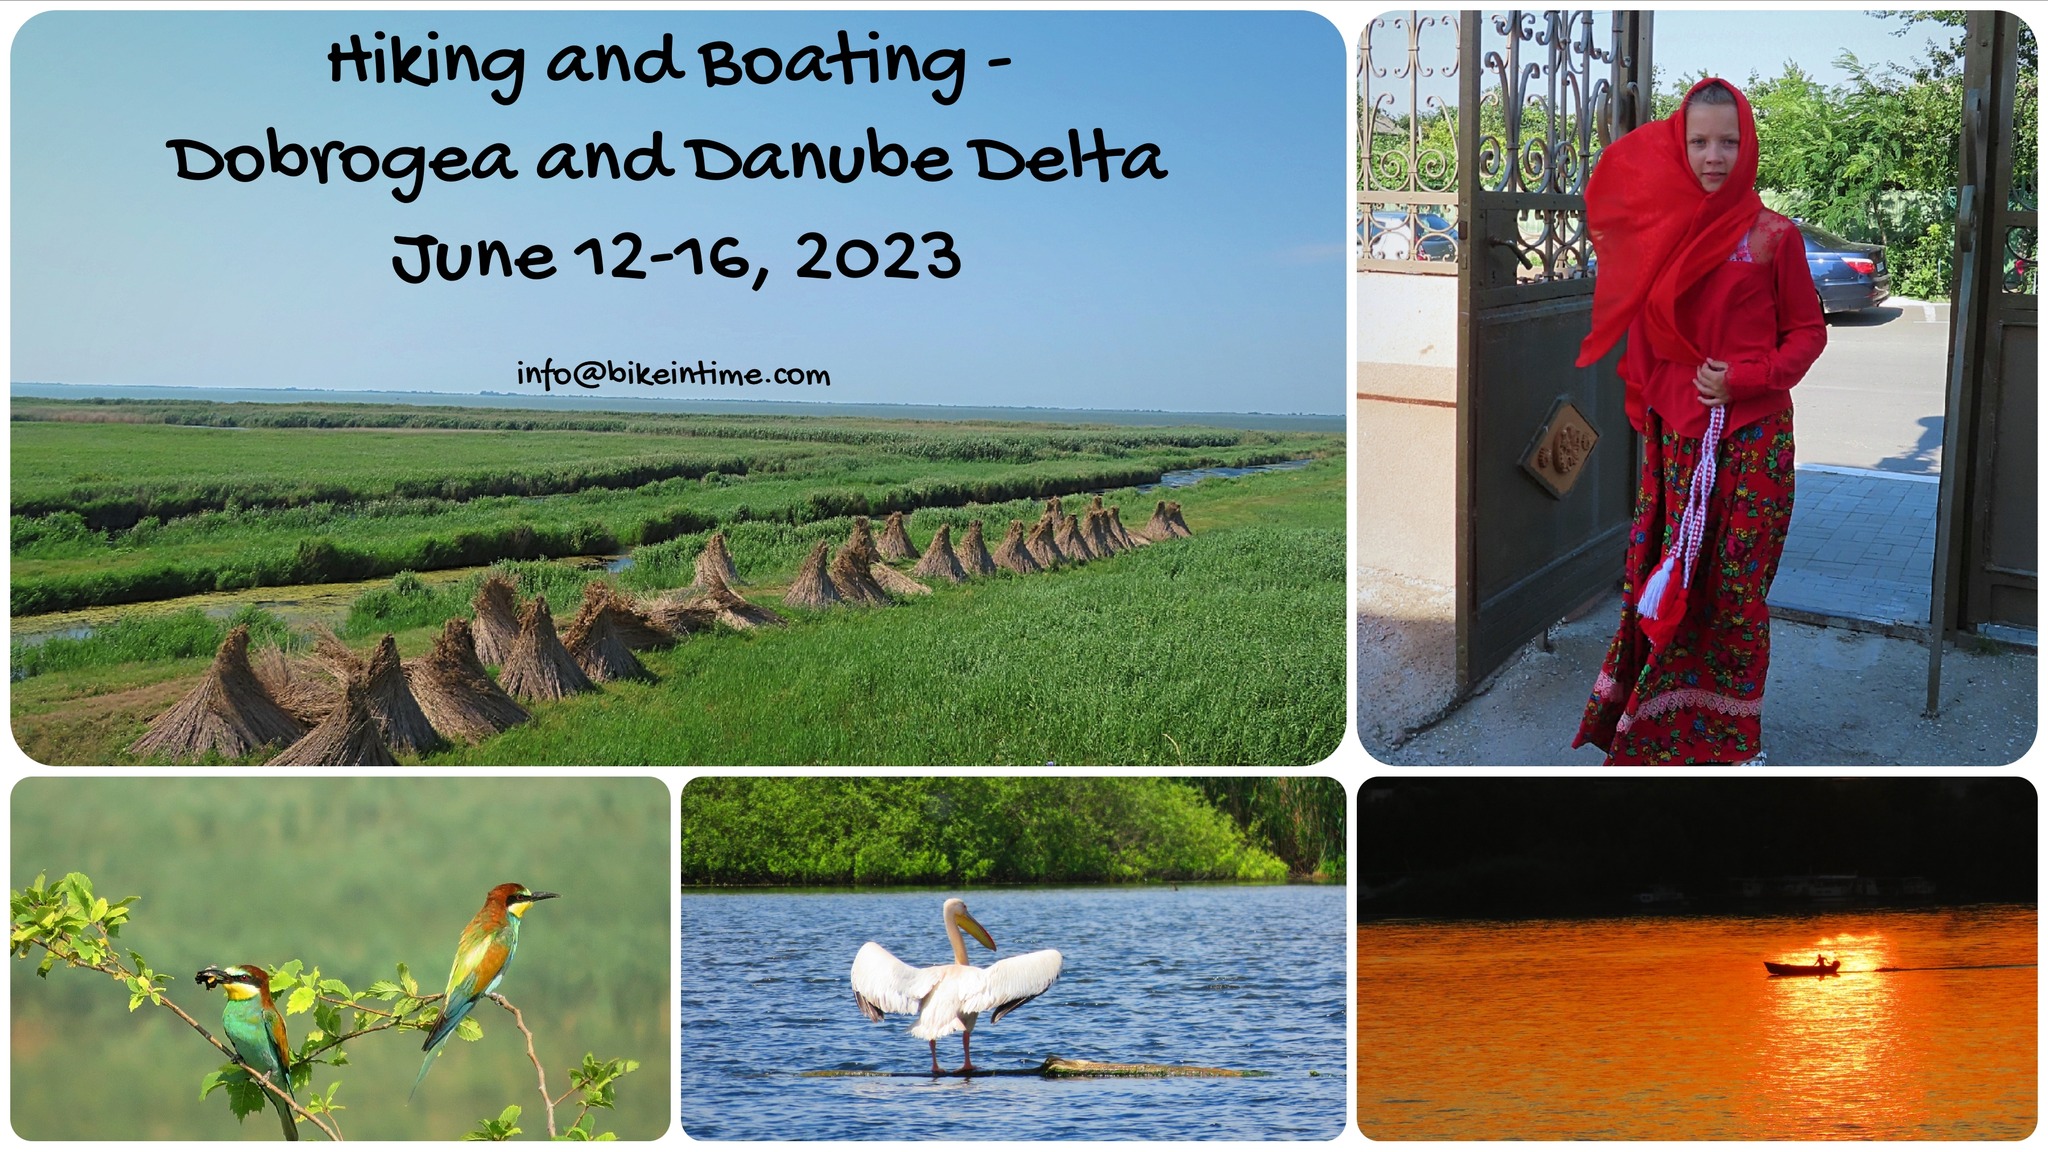 Hiking and Boating - Danube Delta and Dobrogea